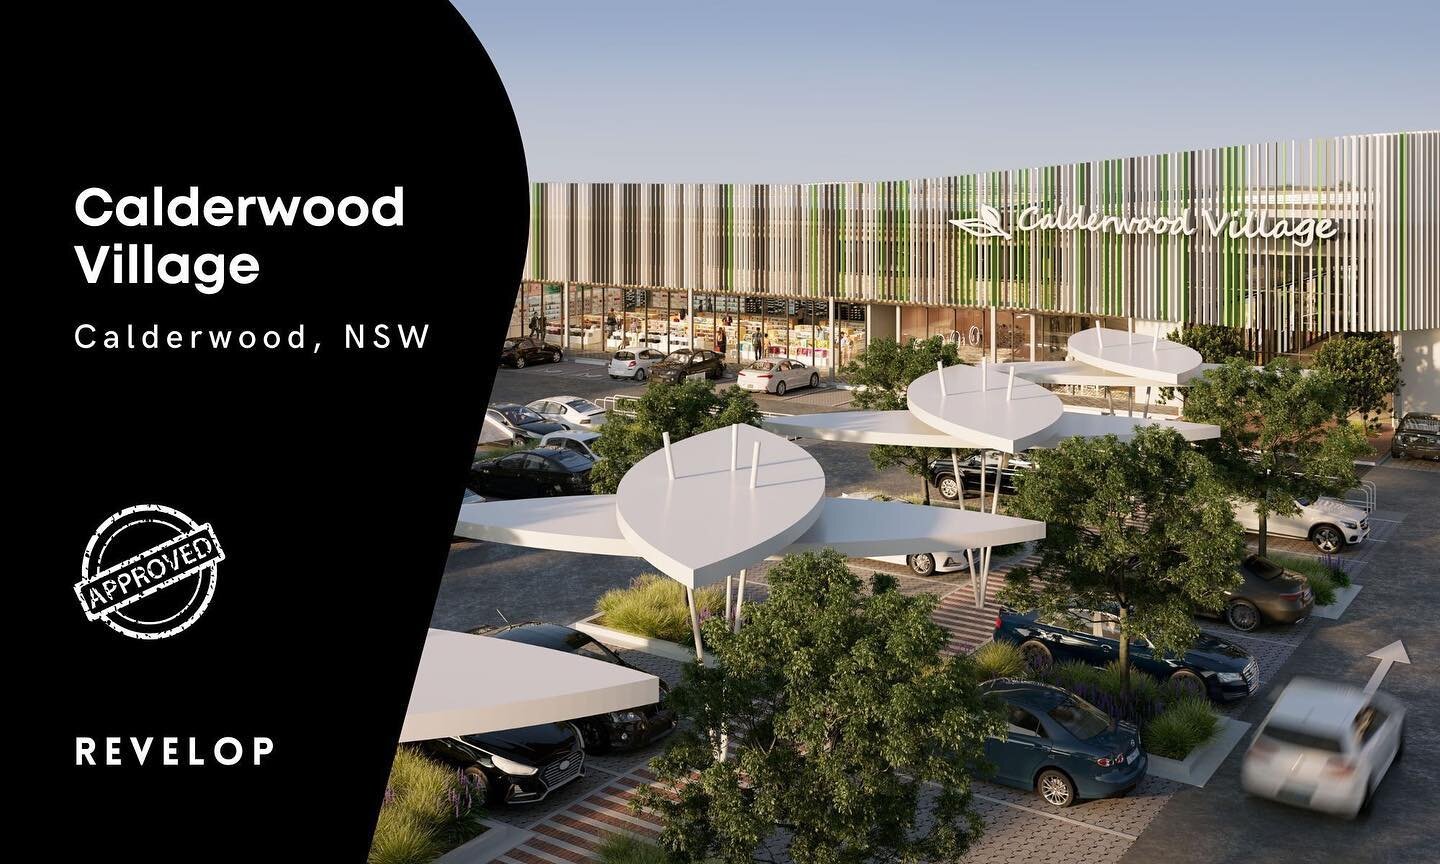 Calderwood Village will sit on the corner of Escarpment Drive and Connection Road, directly opposite the community&rsquo;s newly opened $20 million Plough &amp; Ale Inn, a 4,000 square metre tavern owned and operated by Laundy Hotels Group. The new v